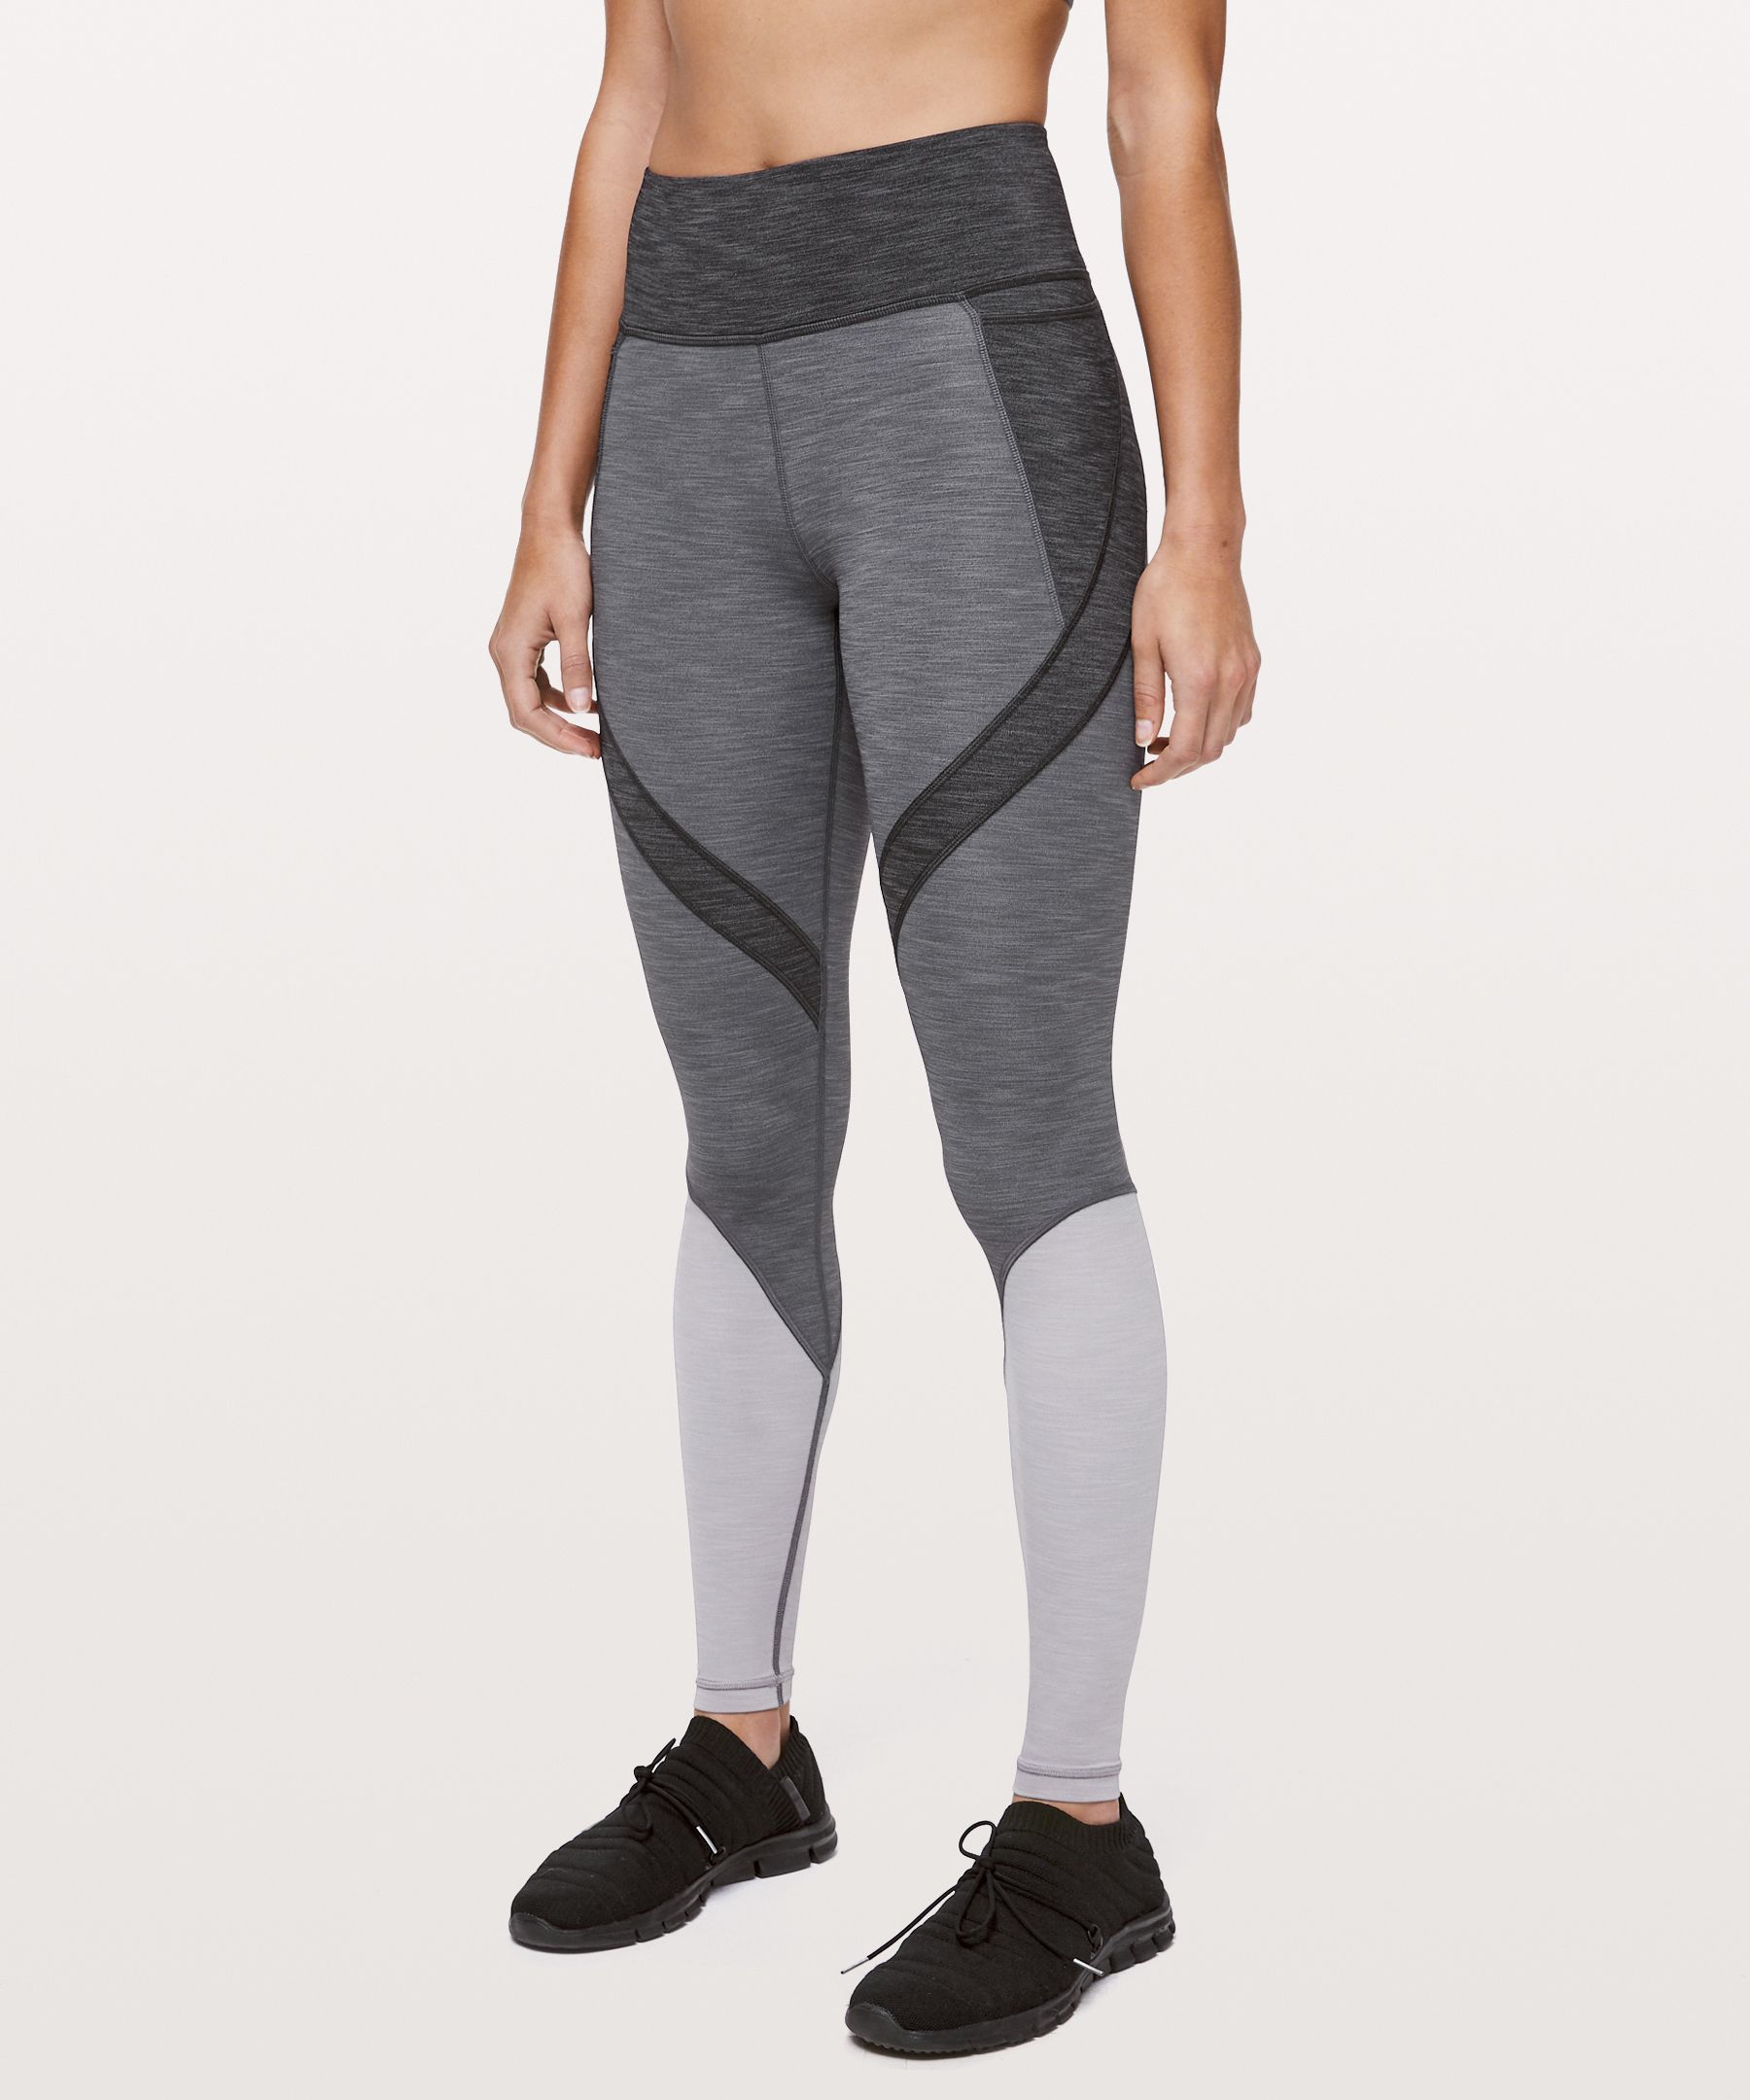 Lululemon Early Extension High-rise Tight *28" In Heathered Black/heathered